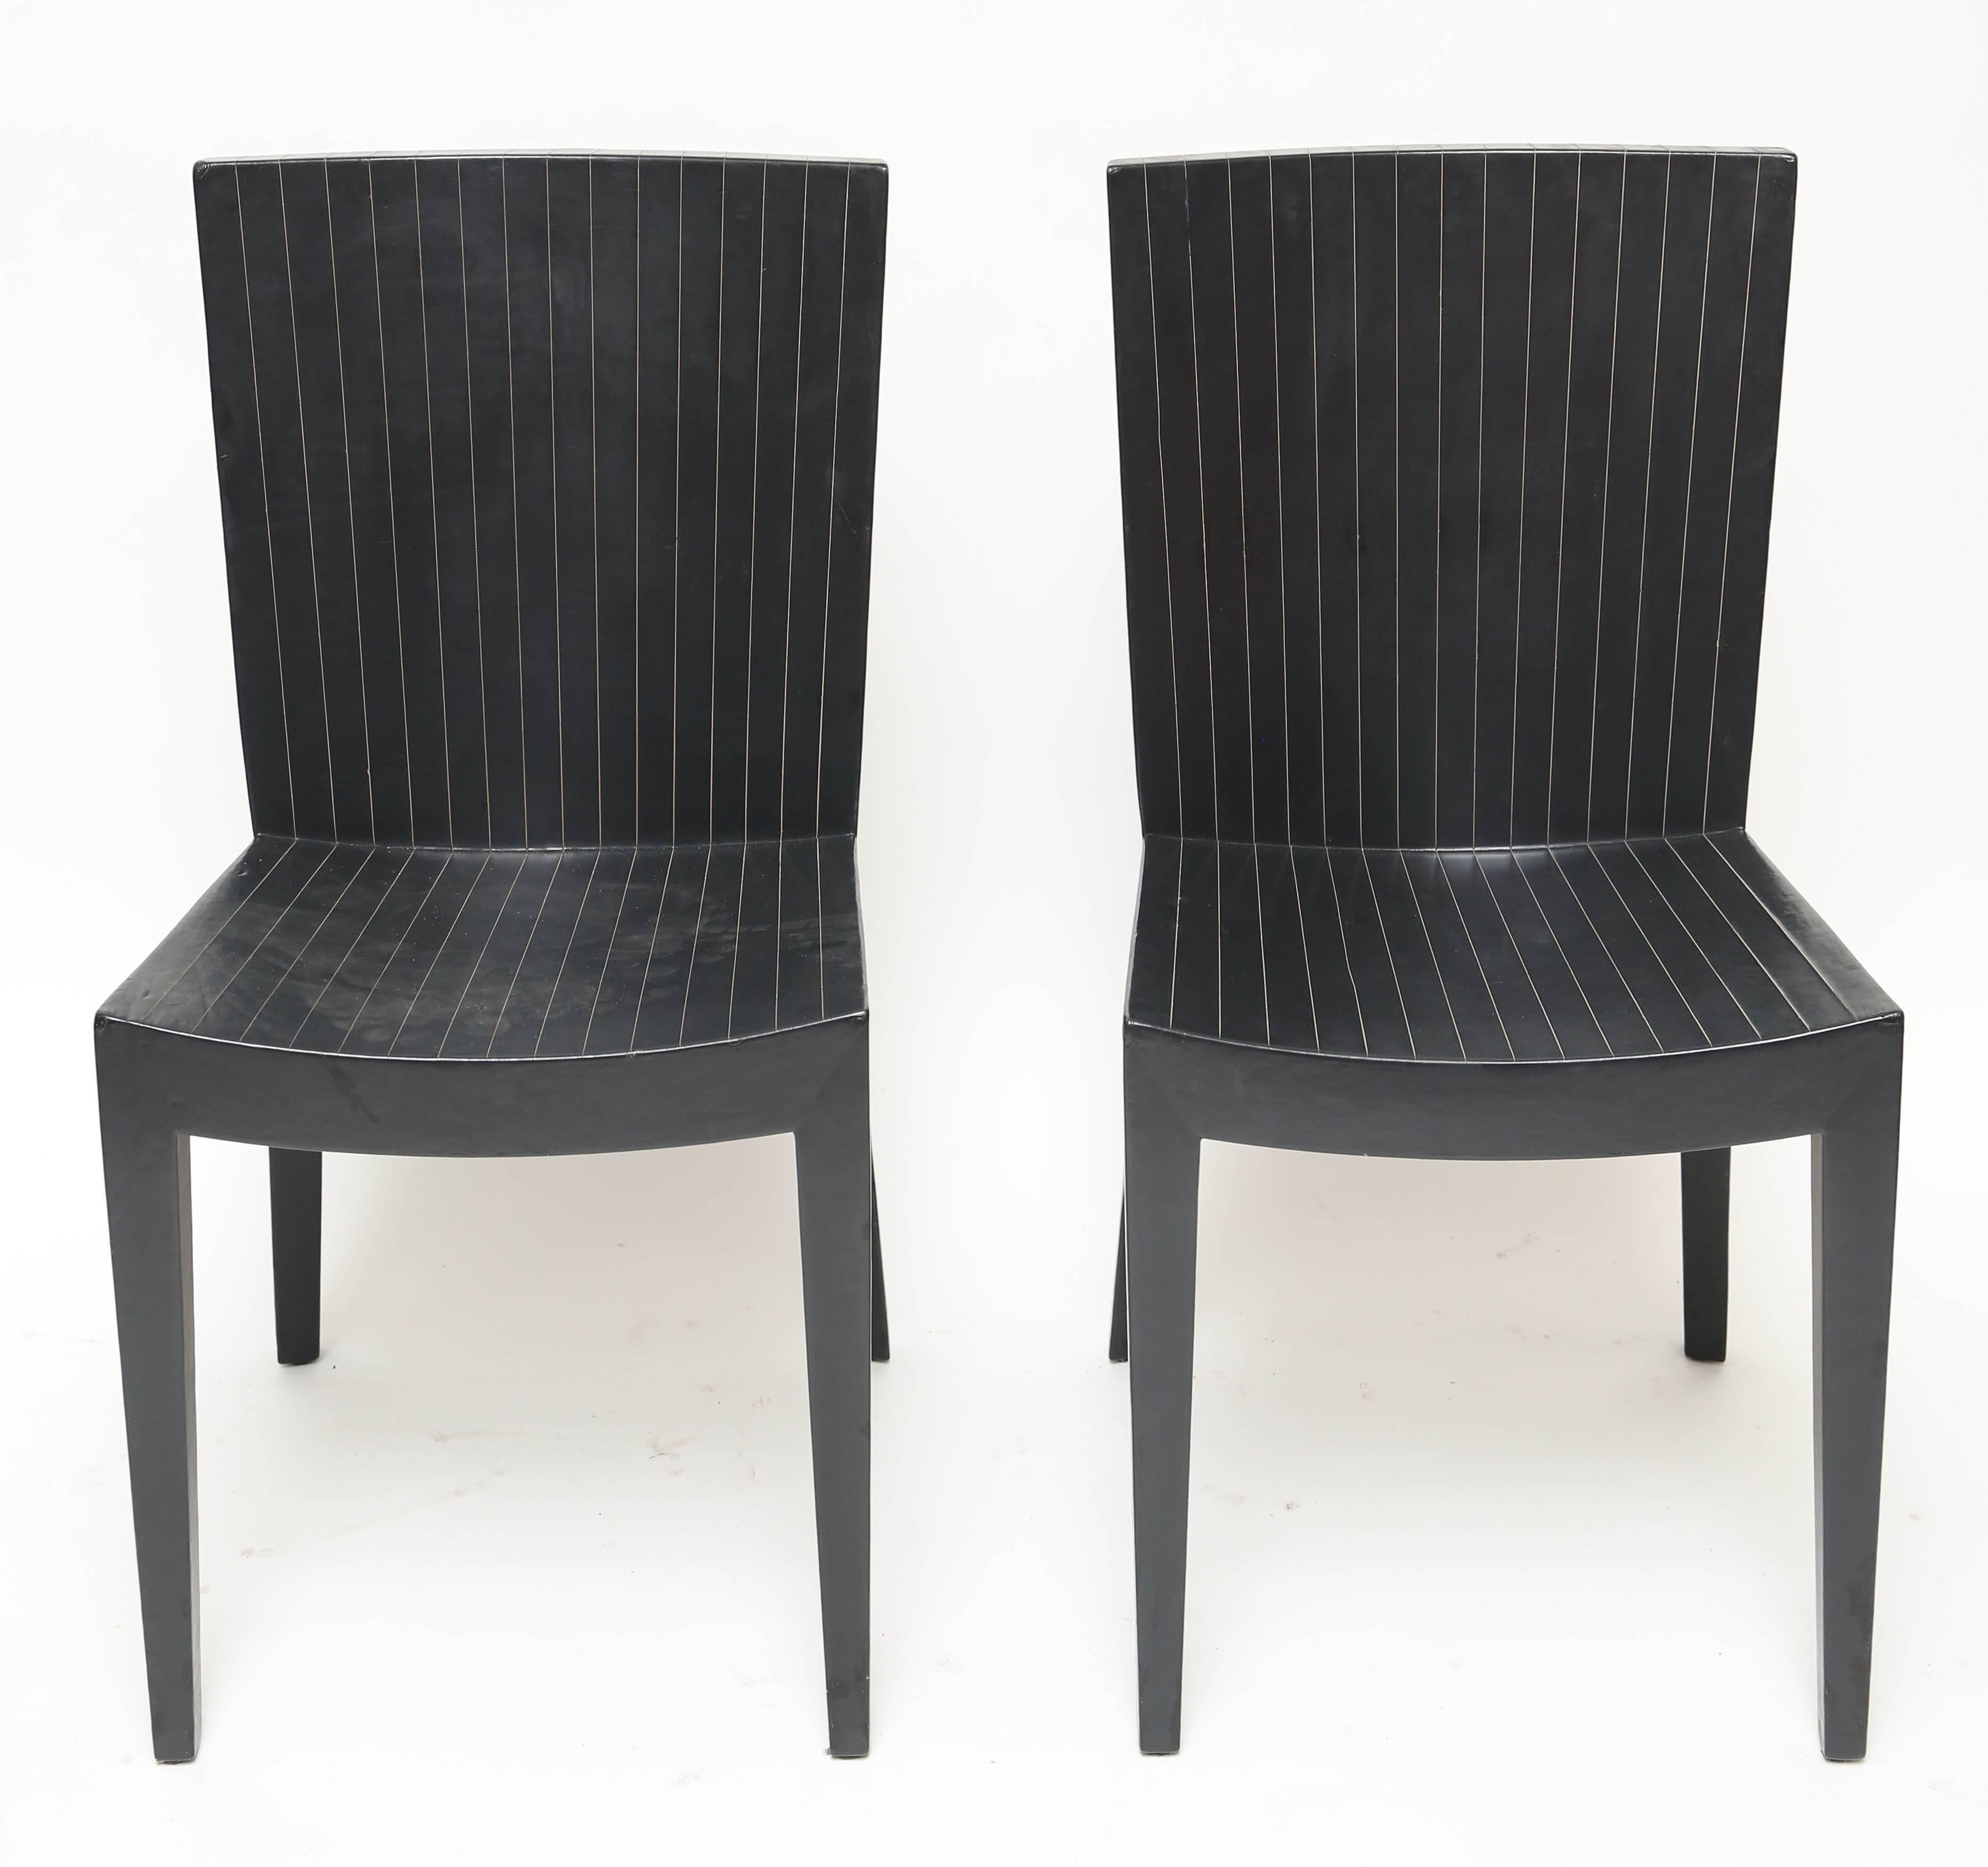 An elegant pair of chairs covered in scored midnight blue leather
price is for both chairs.